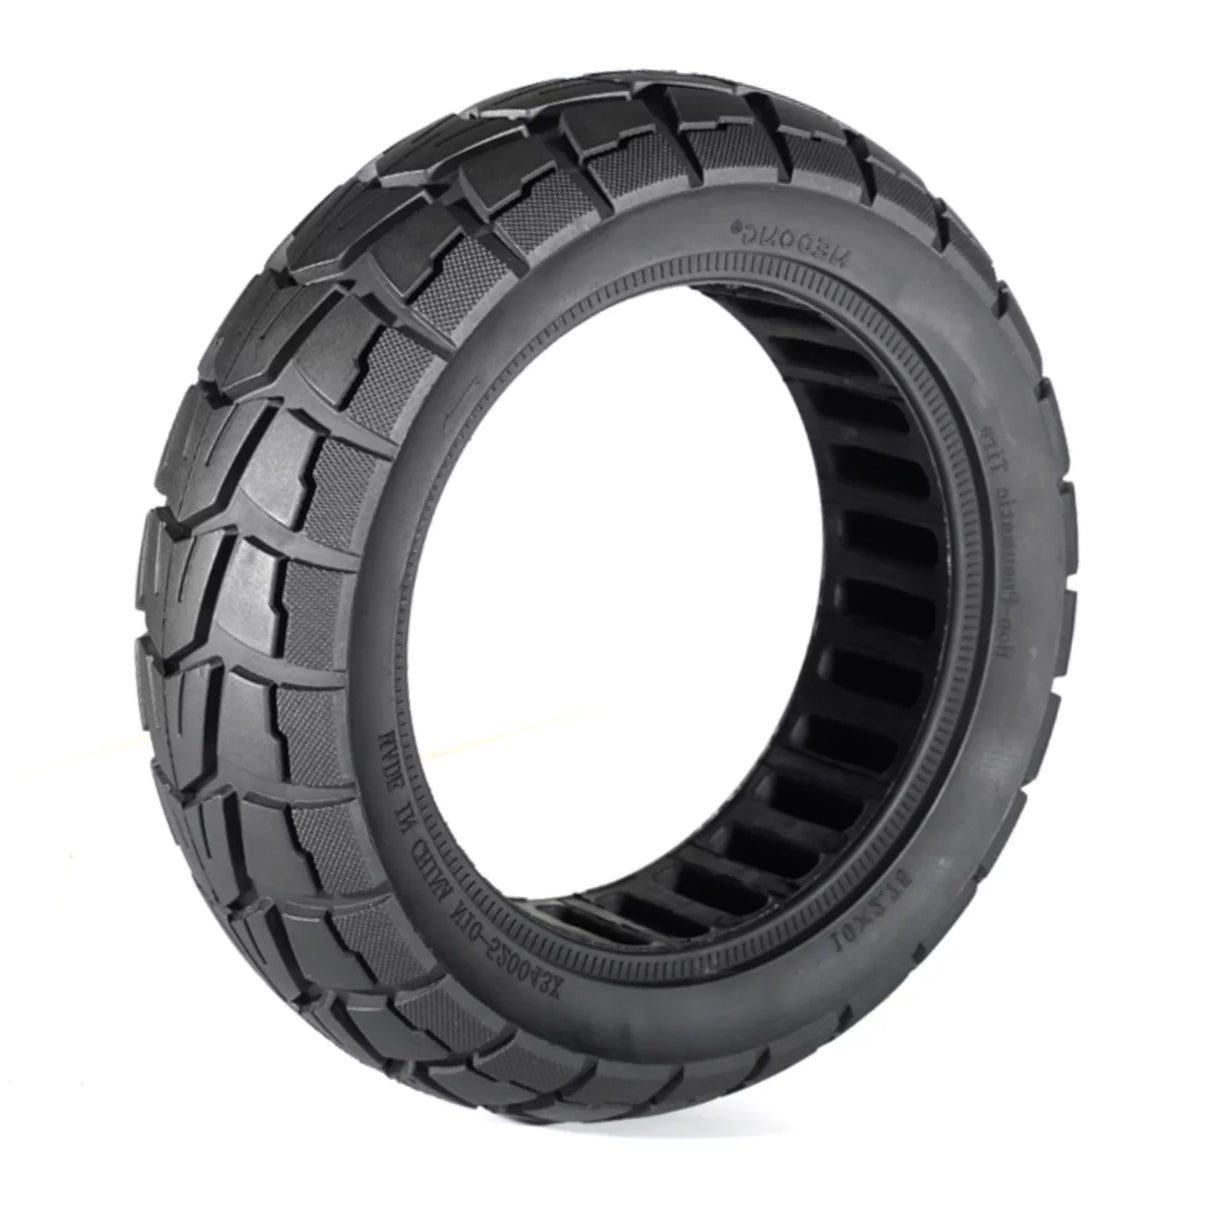 Solid wheel 10×2.75 offroad